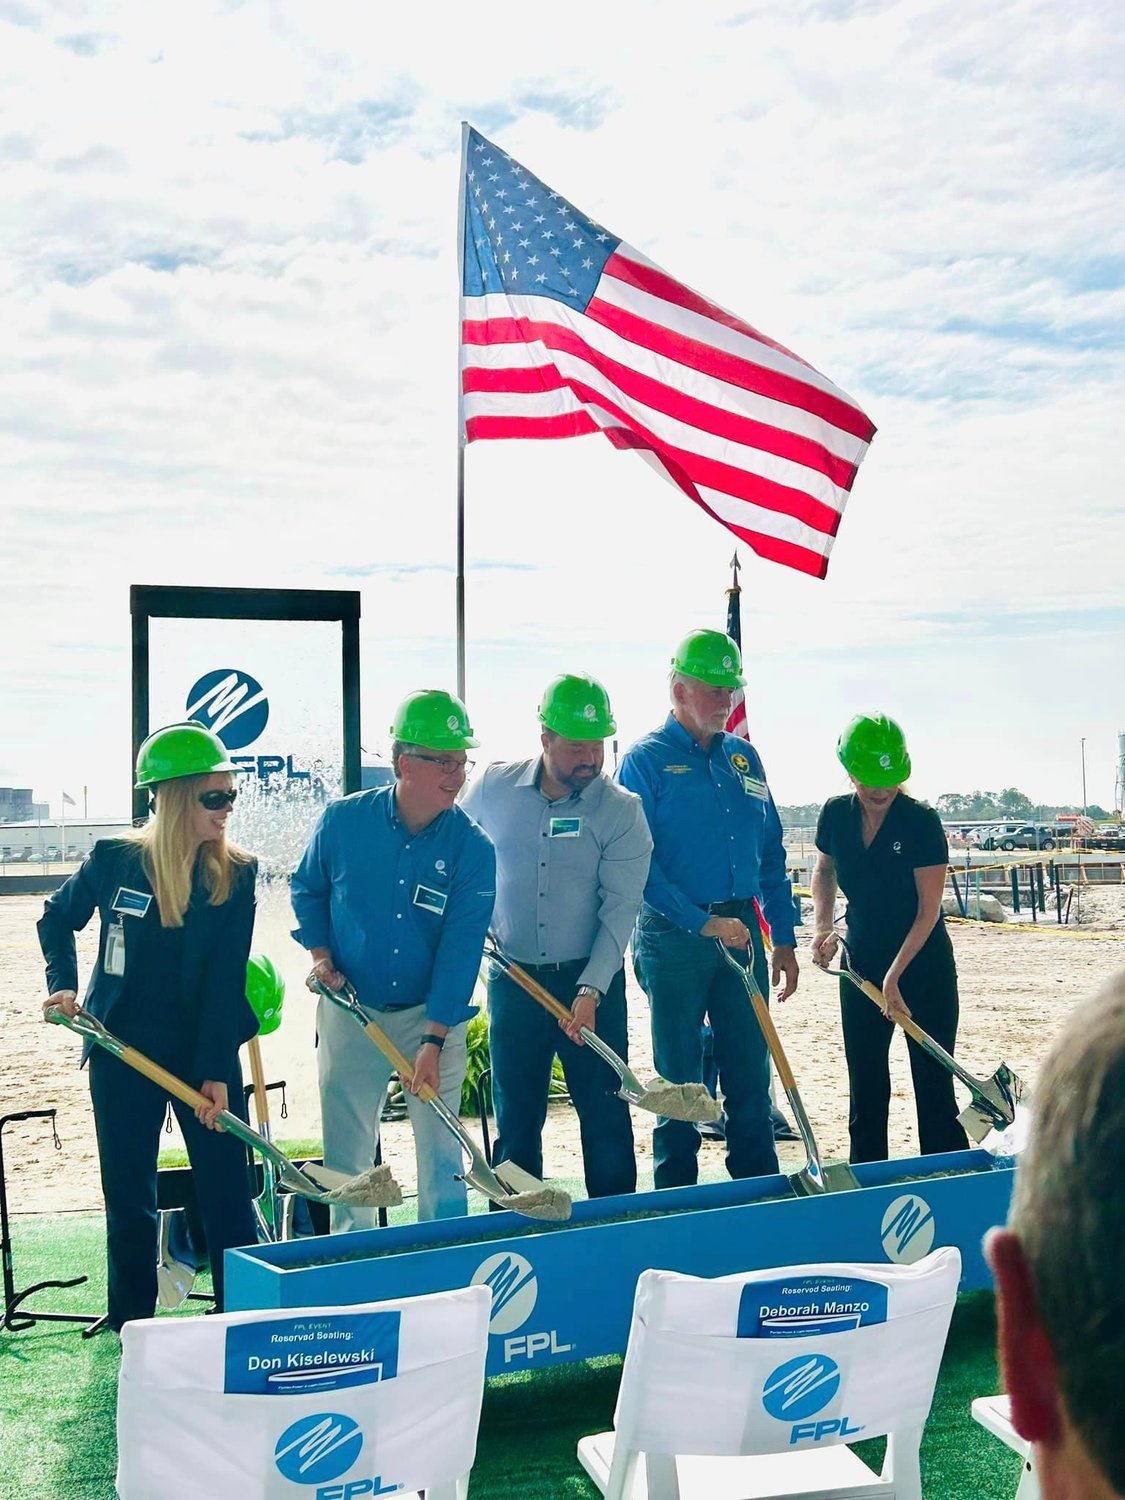 OKEECHOBEE COUNTY -- On Dec. 15, FPL and Okeechobee County officials celebrated the groundbreaking for the Cavendish NexGen Hydrogren Hub, which will be at the Okeechobee Clean Energy Plant.